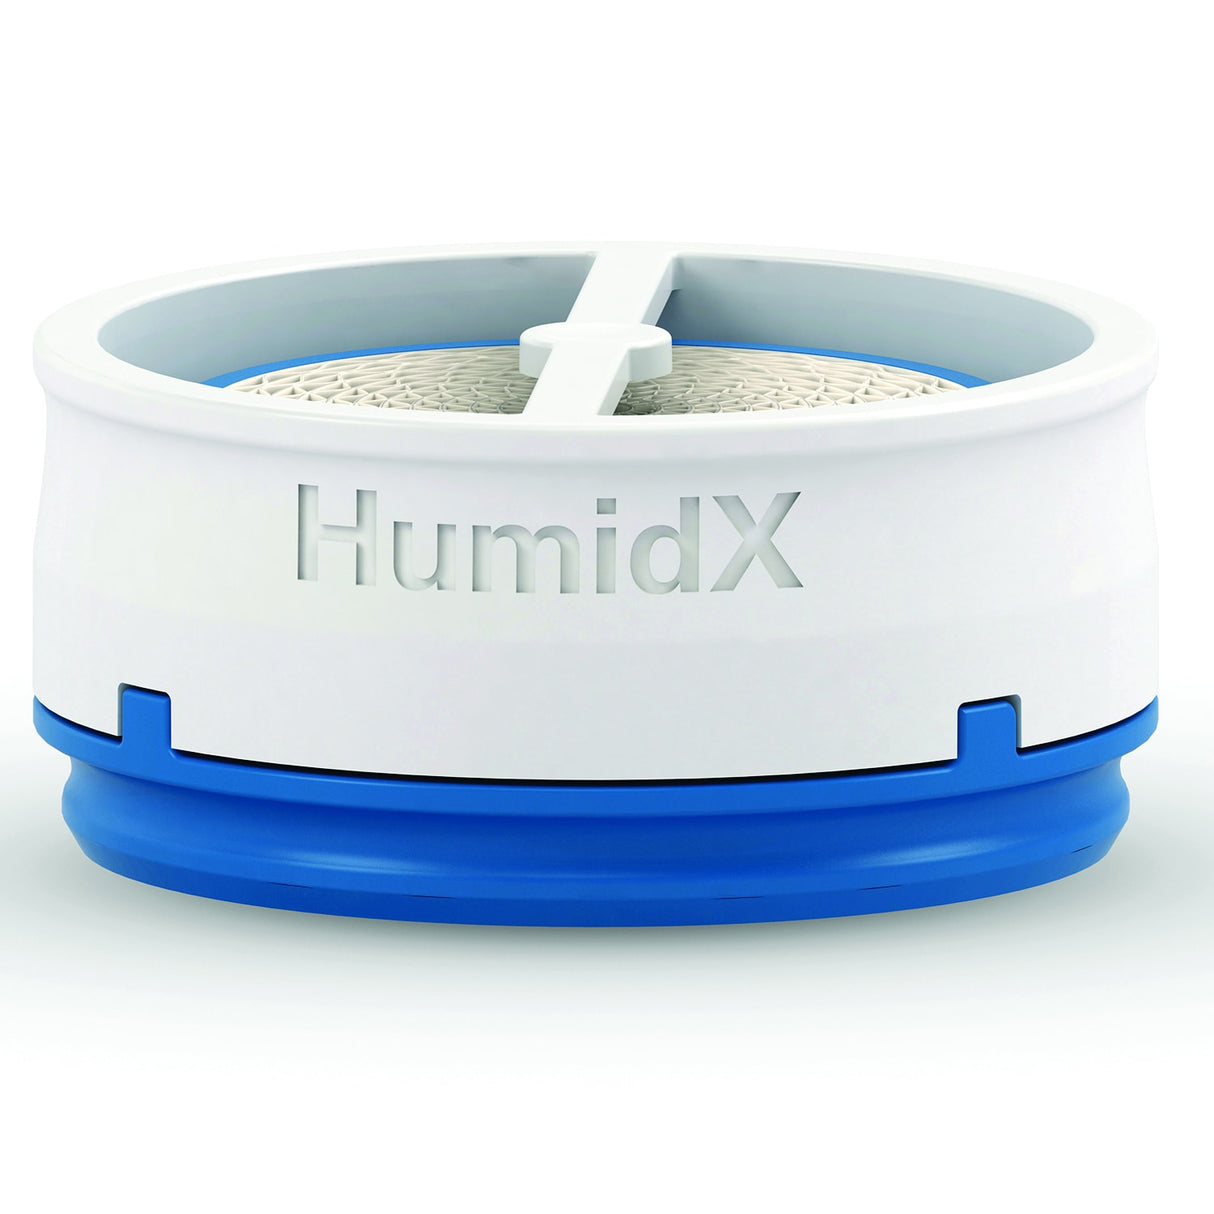 ResMed Airmini HumidX Filter 3 Pack | CPAP Superstore Canada